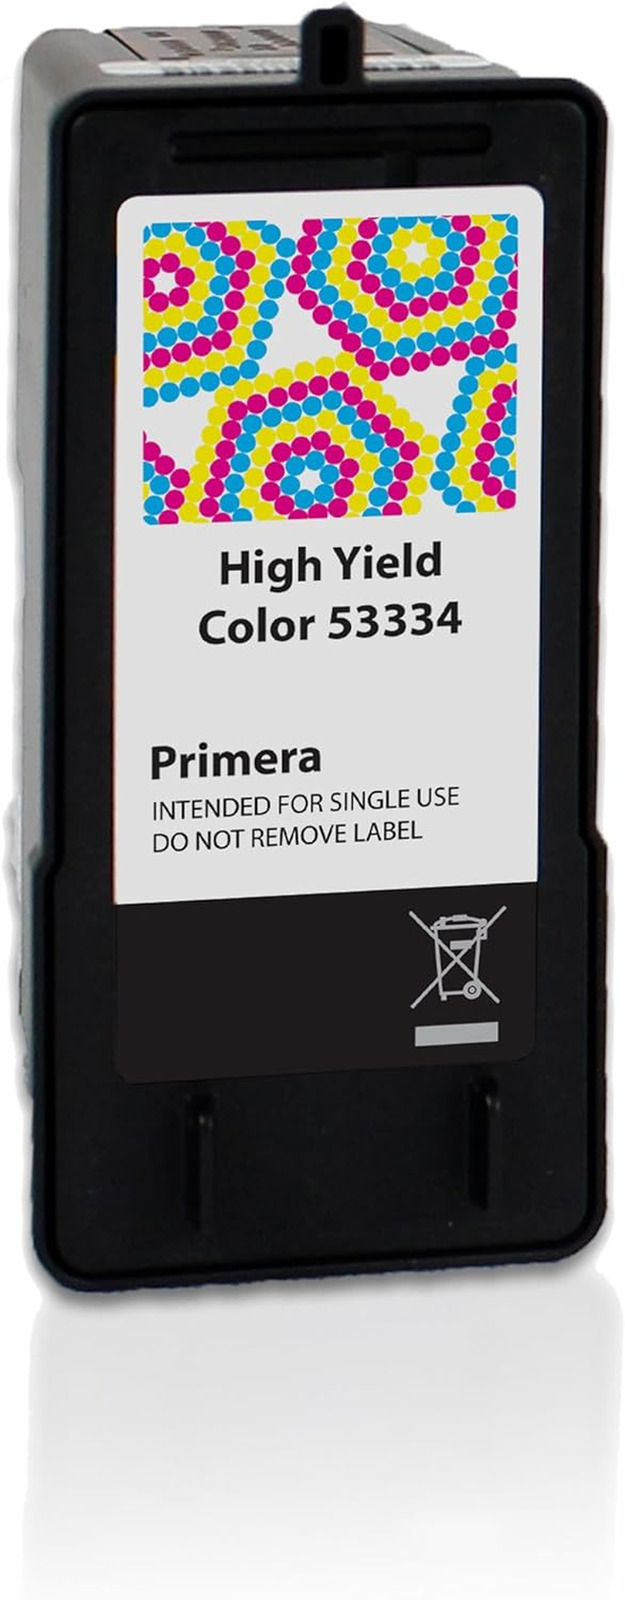 53334 High Yield Tri-Color Ink Cartridge for Bravo SE-3, 4200